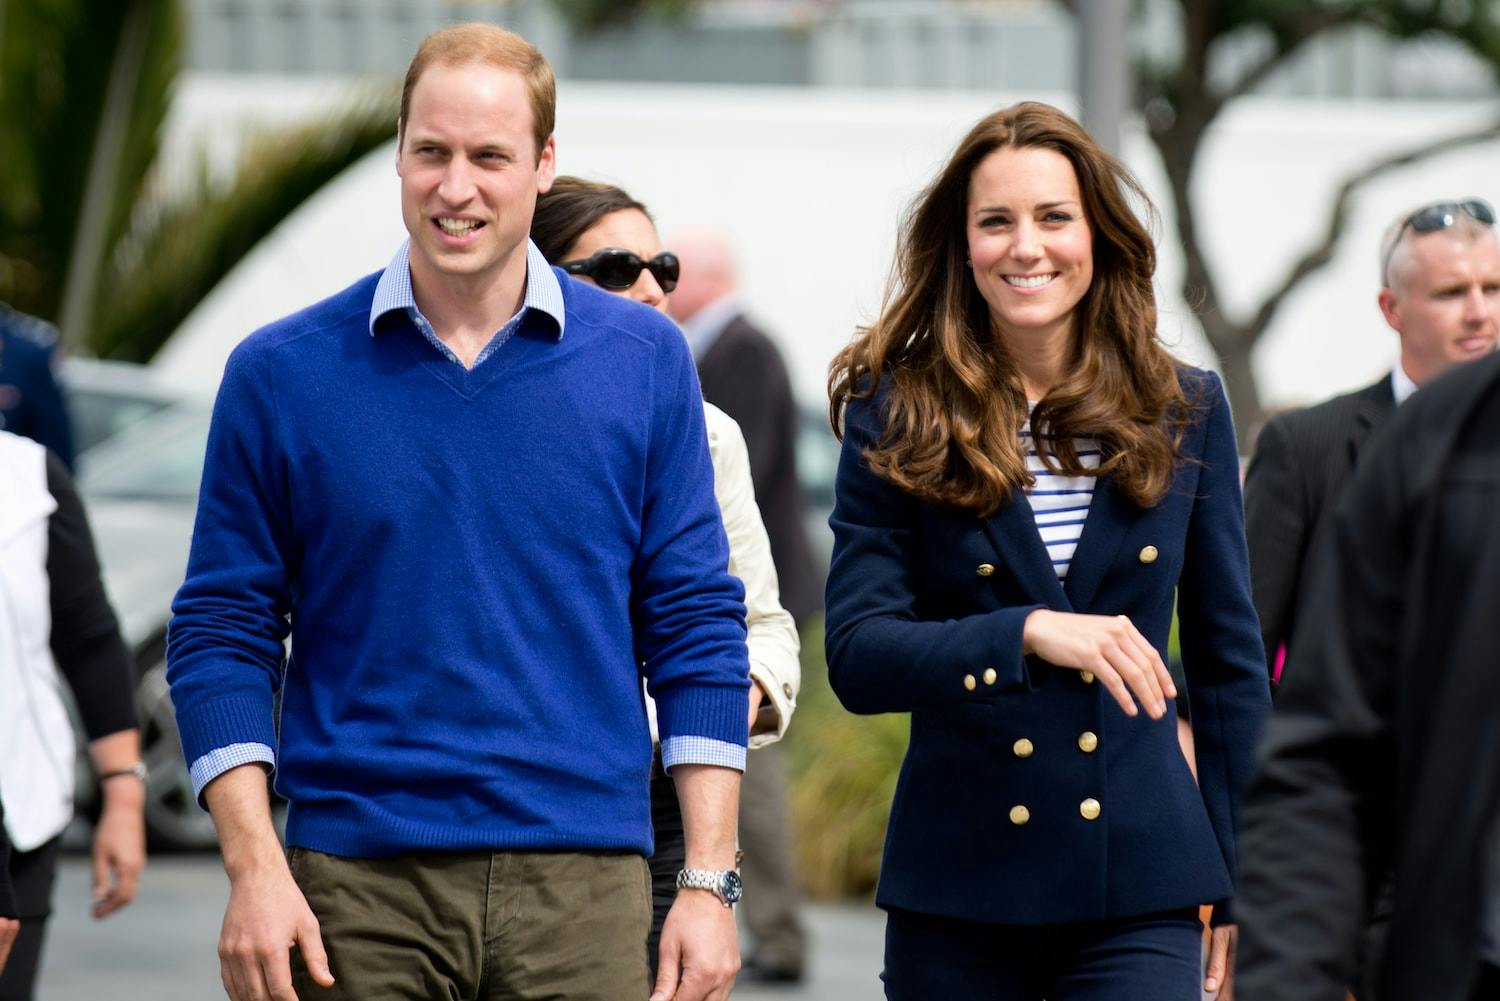 Royal Foundation to Tackle Causes of Mental Health Issues